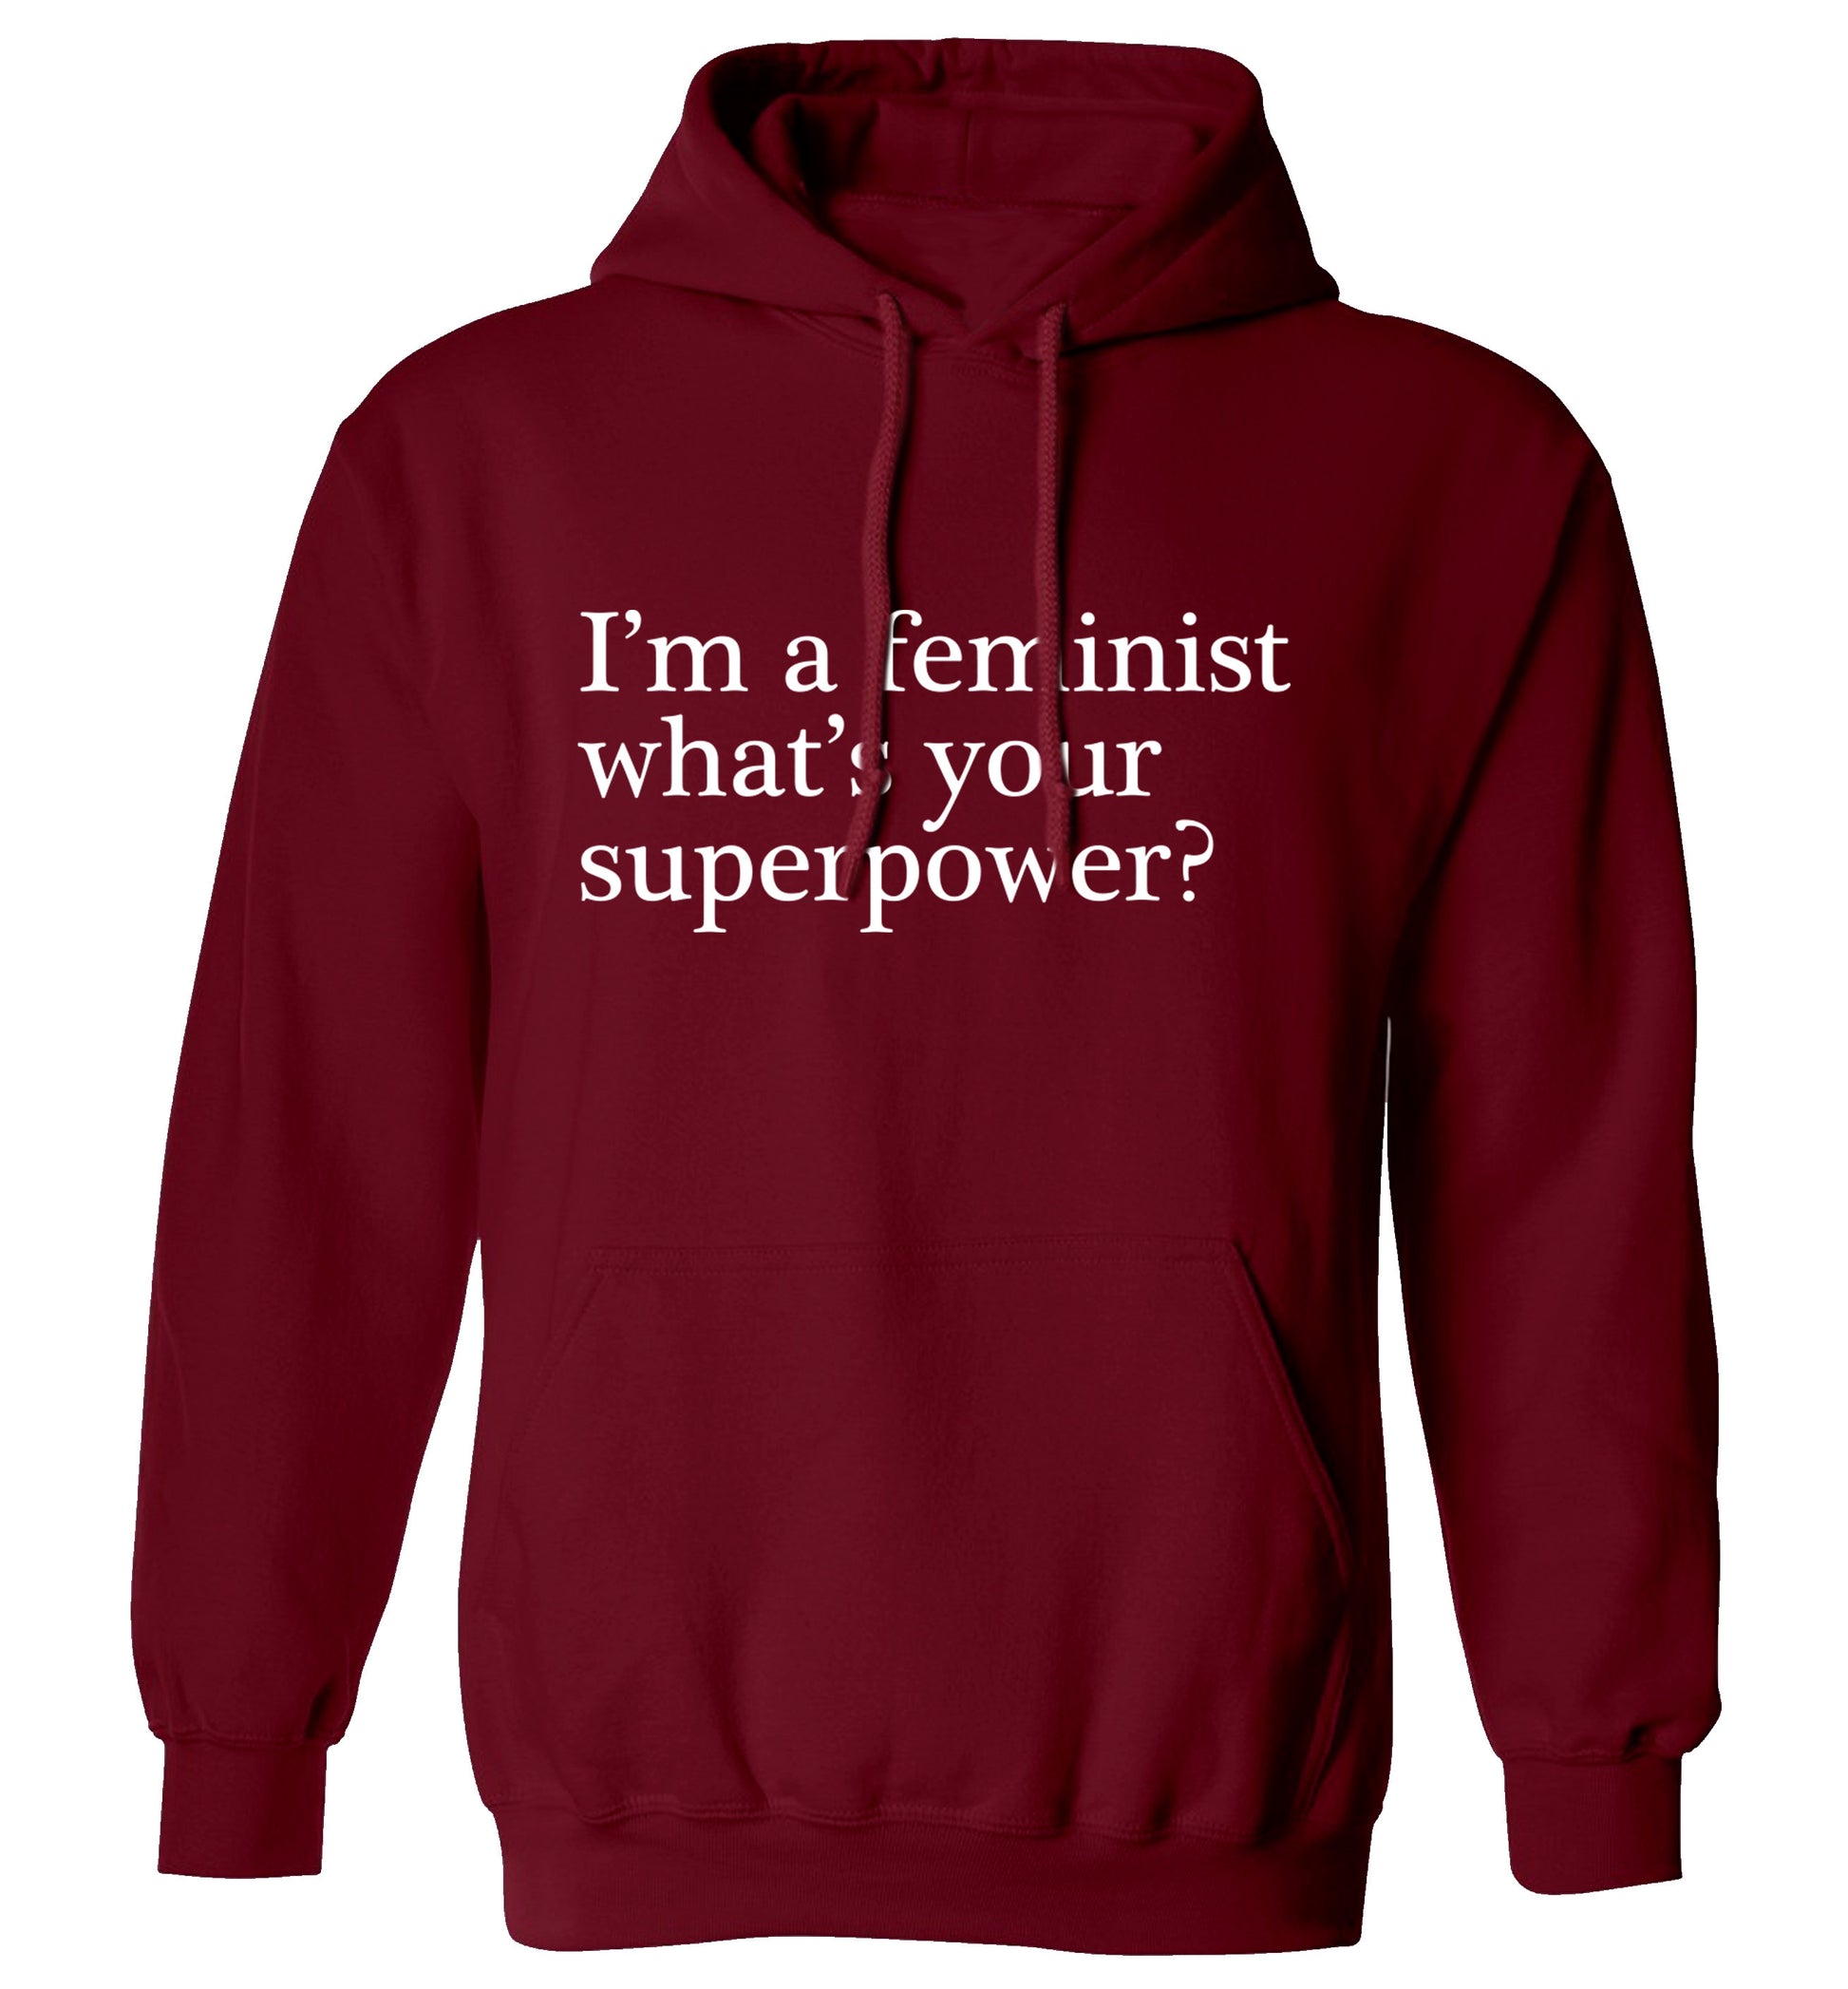 I'm a feminist what's your superpower? adults unisex maroon hoodie 2XL